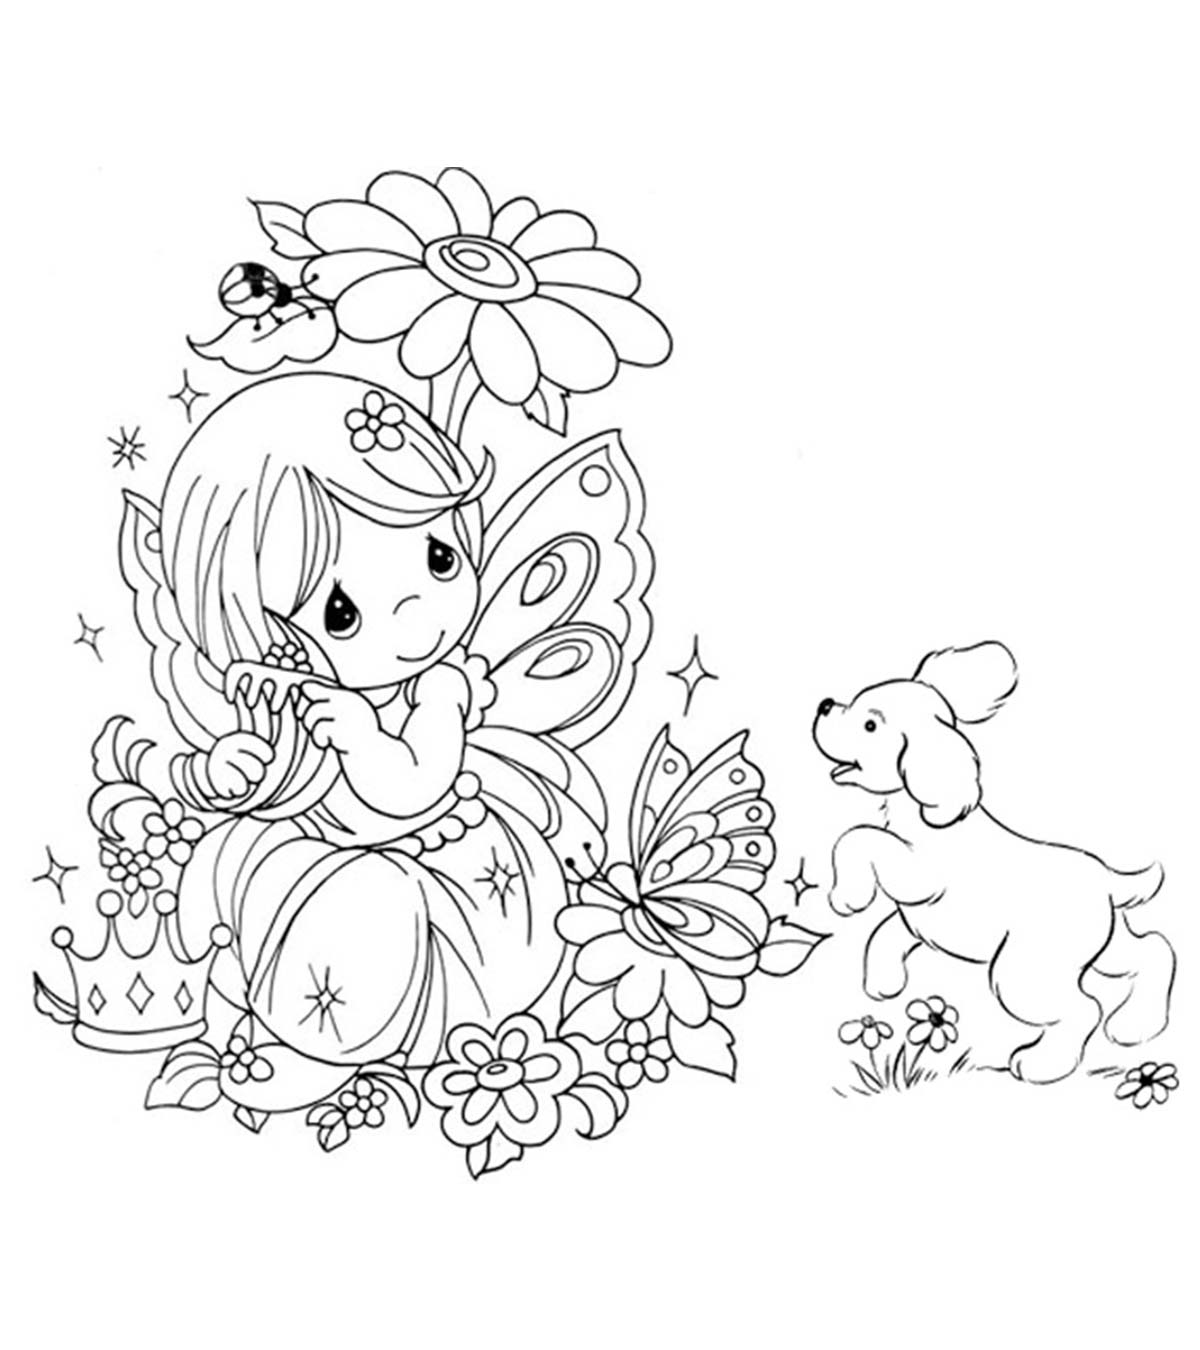 Disney Coloring Pages MomJunction